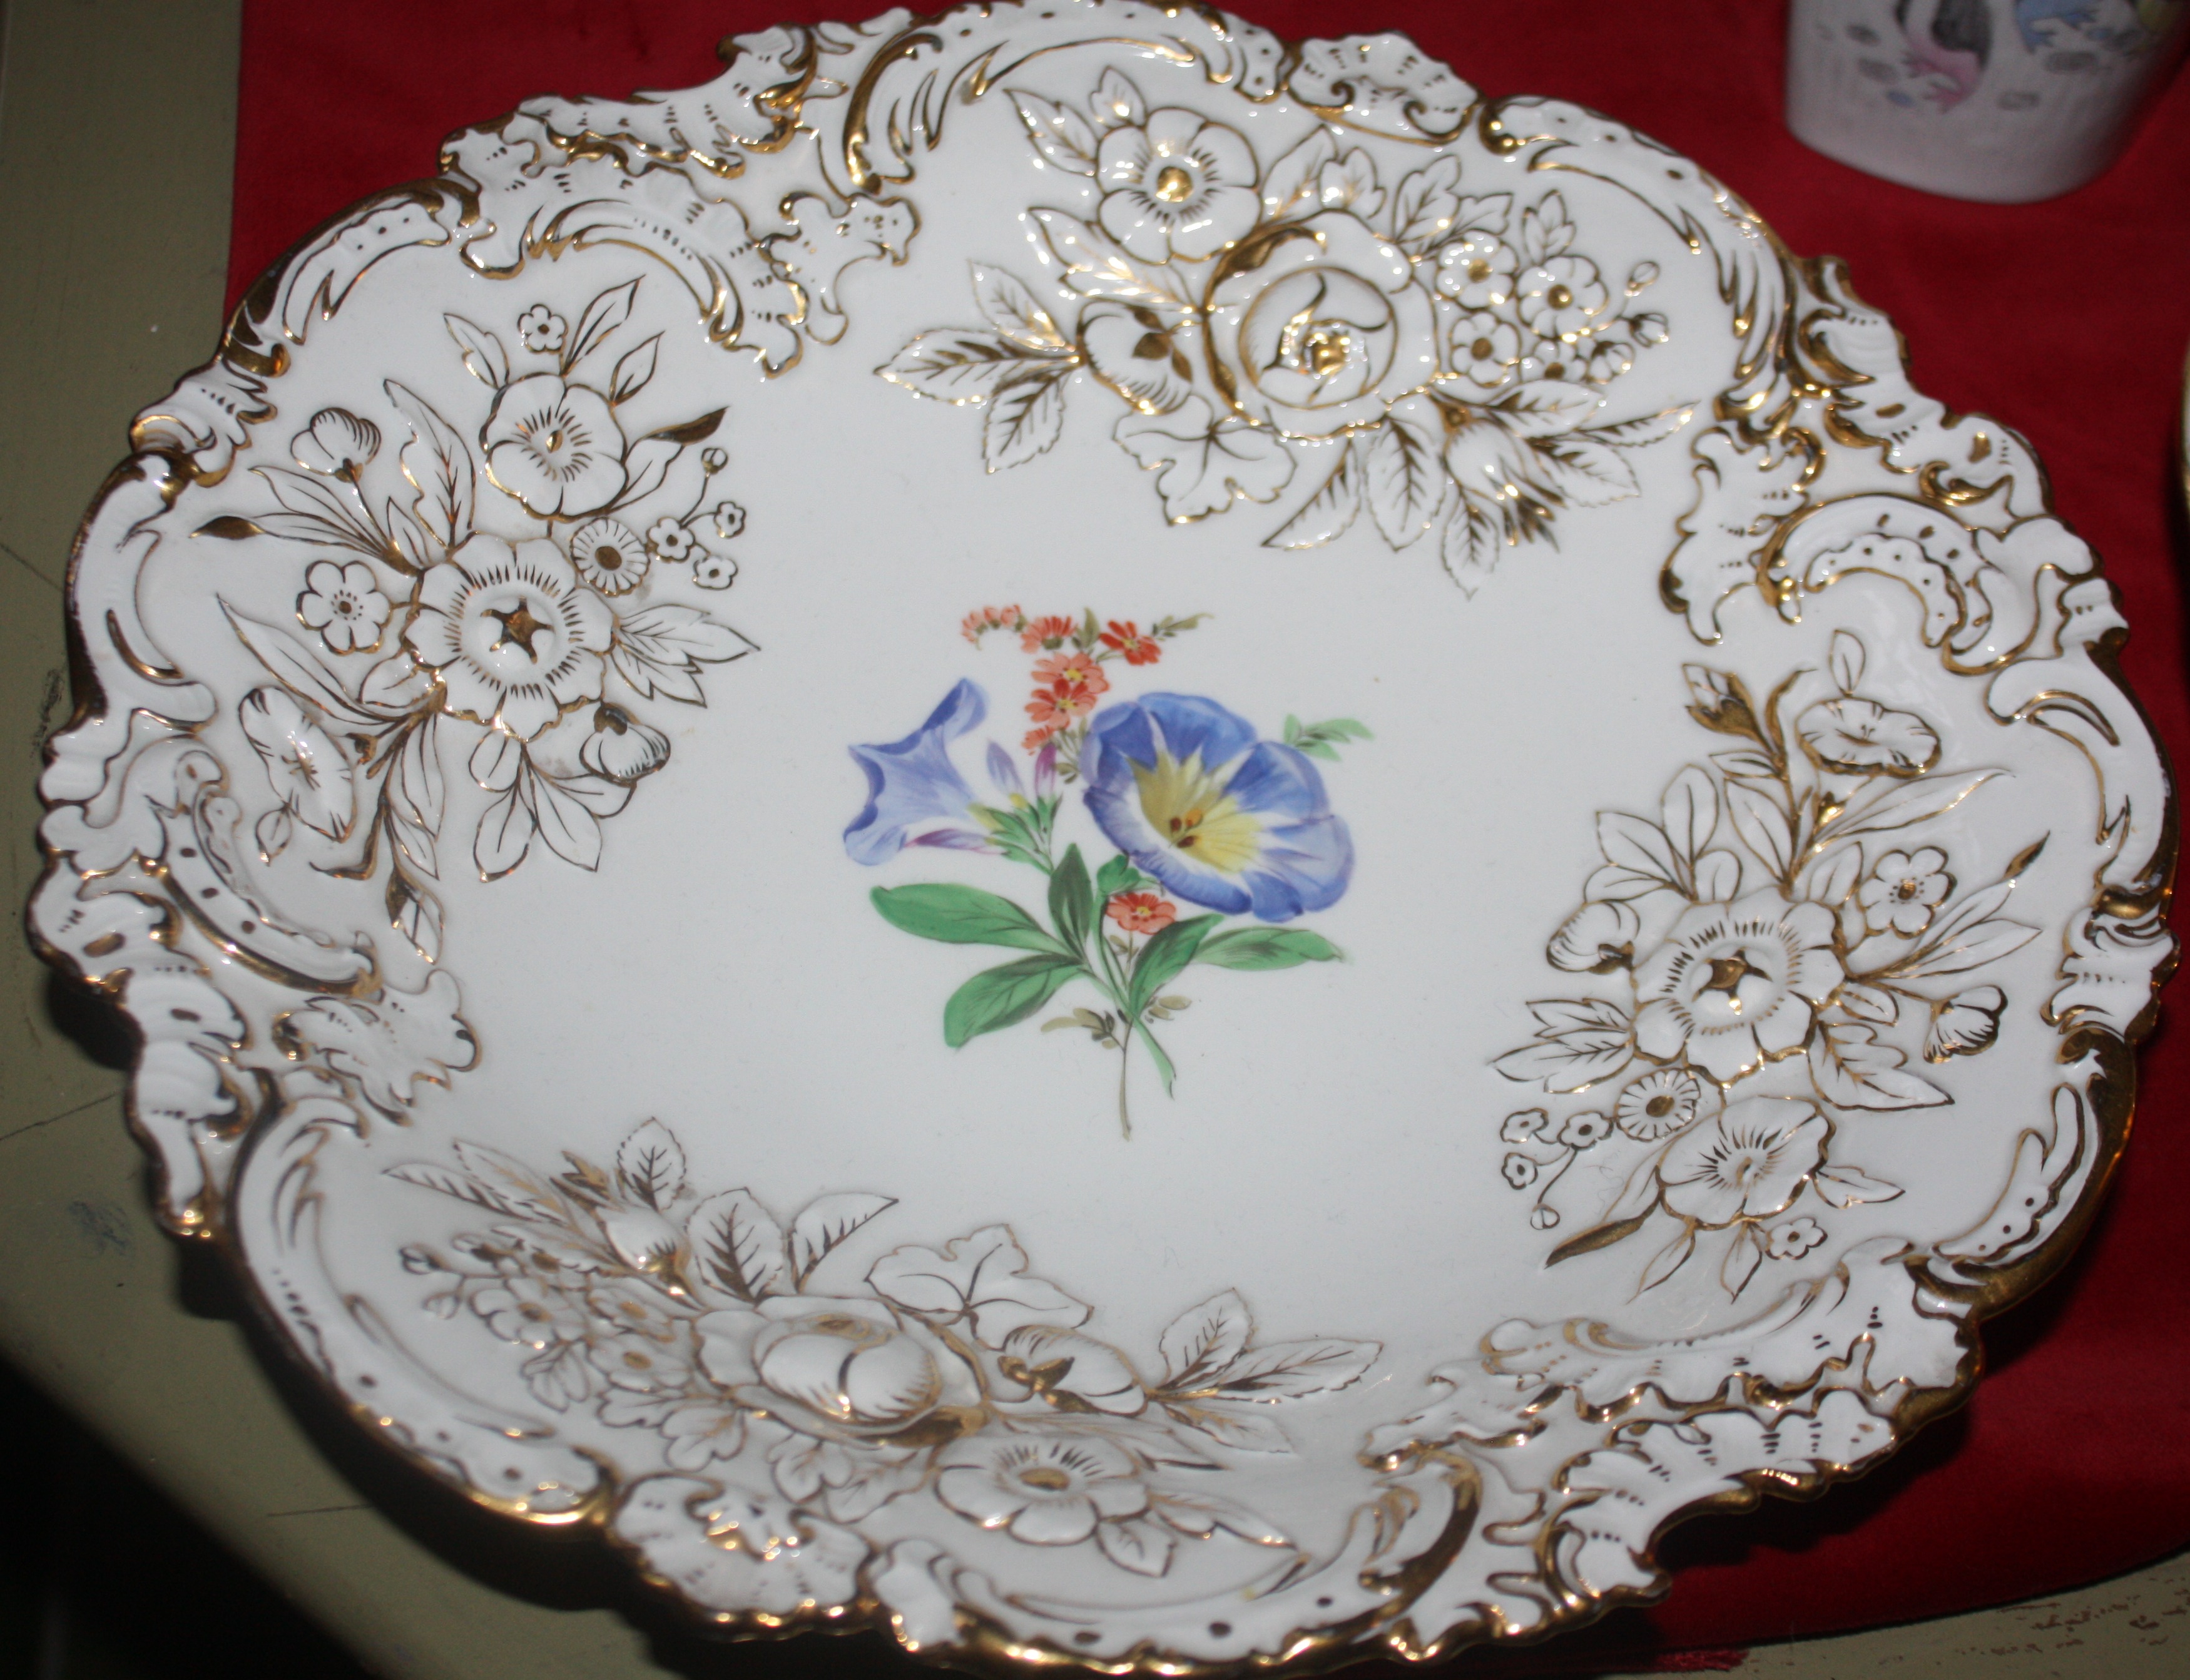 A big beautiful 20th century white and golden ornate Meissen relief plate